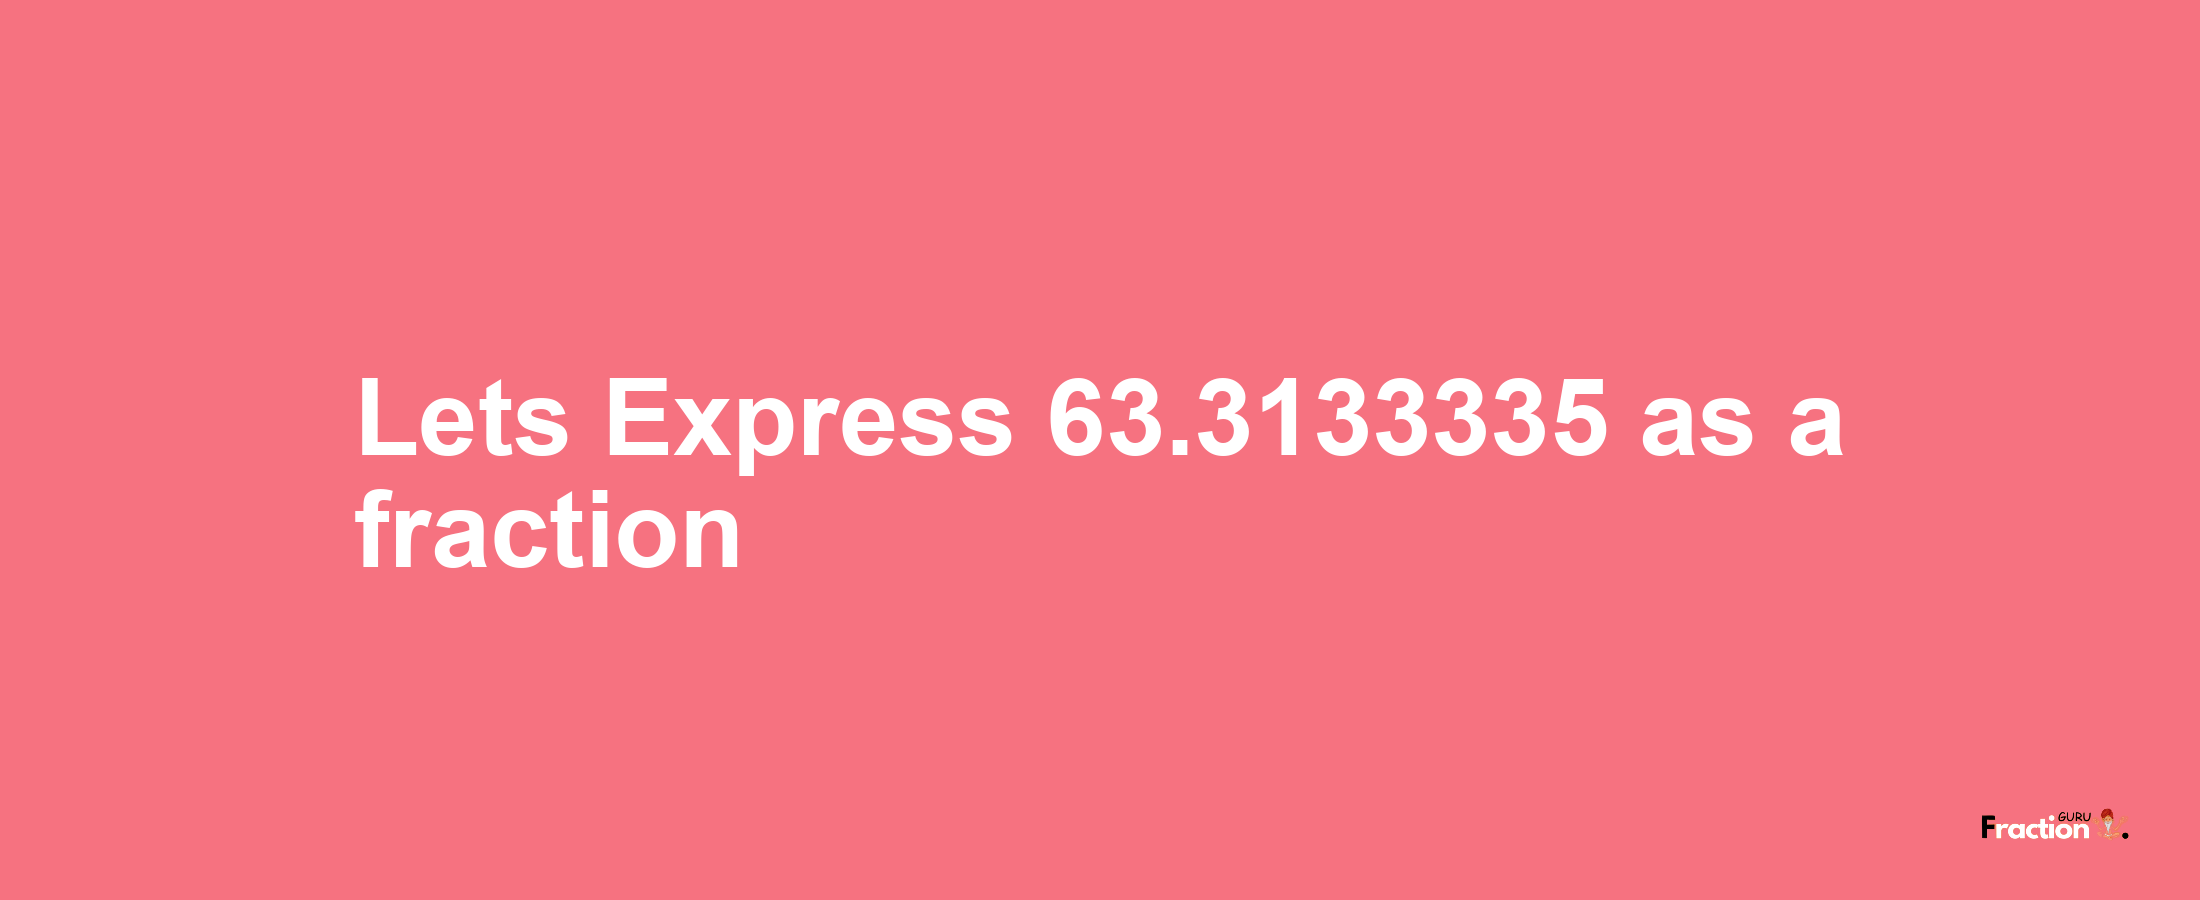 Lets Express 63.3133335 as afraction